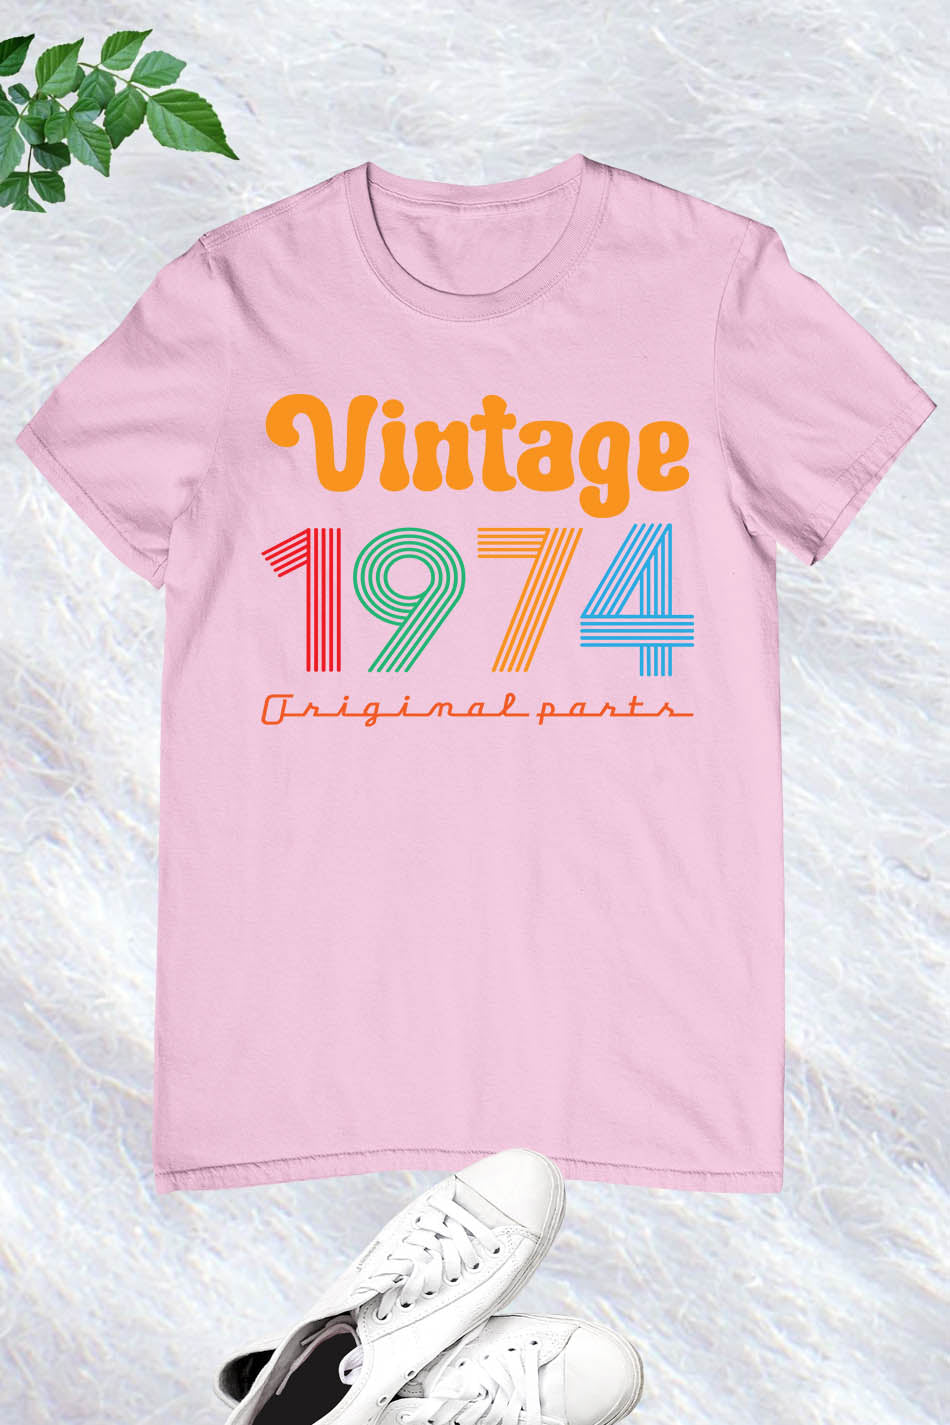 Personalized Vintage 1974 50th Birthday Retro T-Shirts Gift for Womens